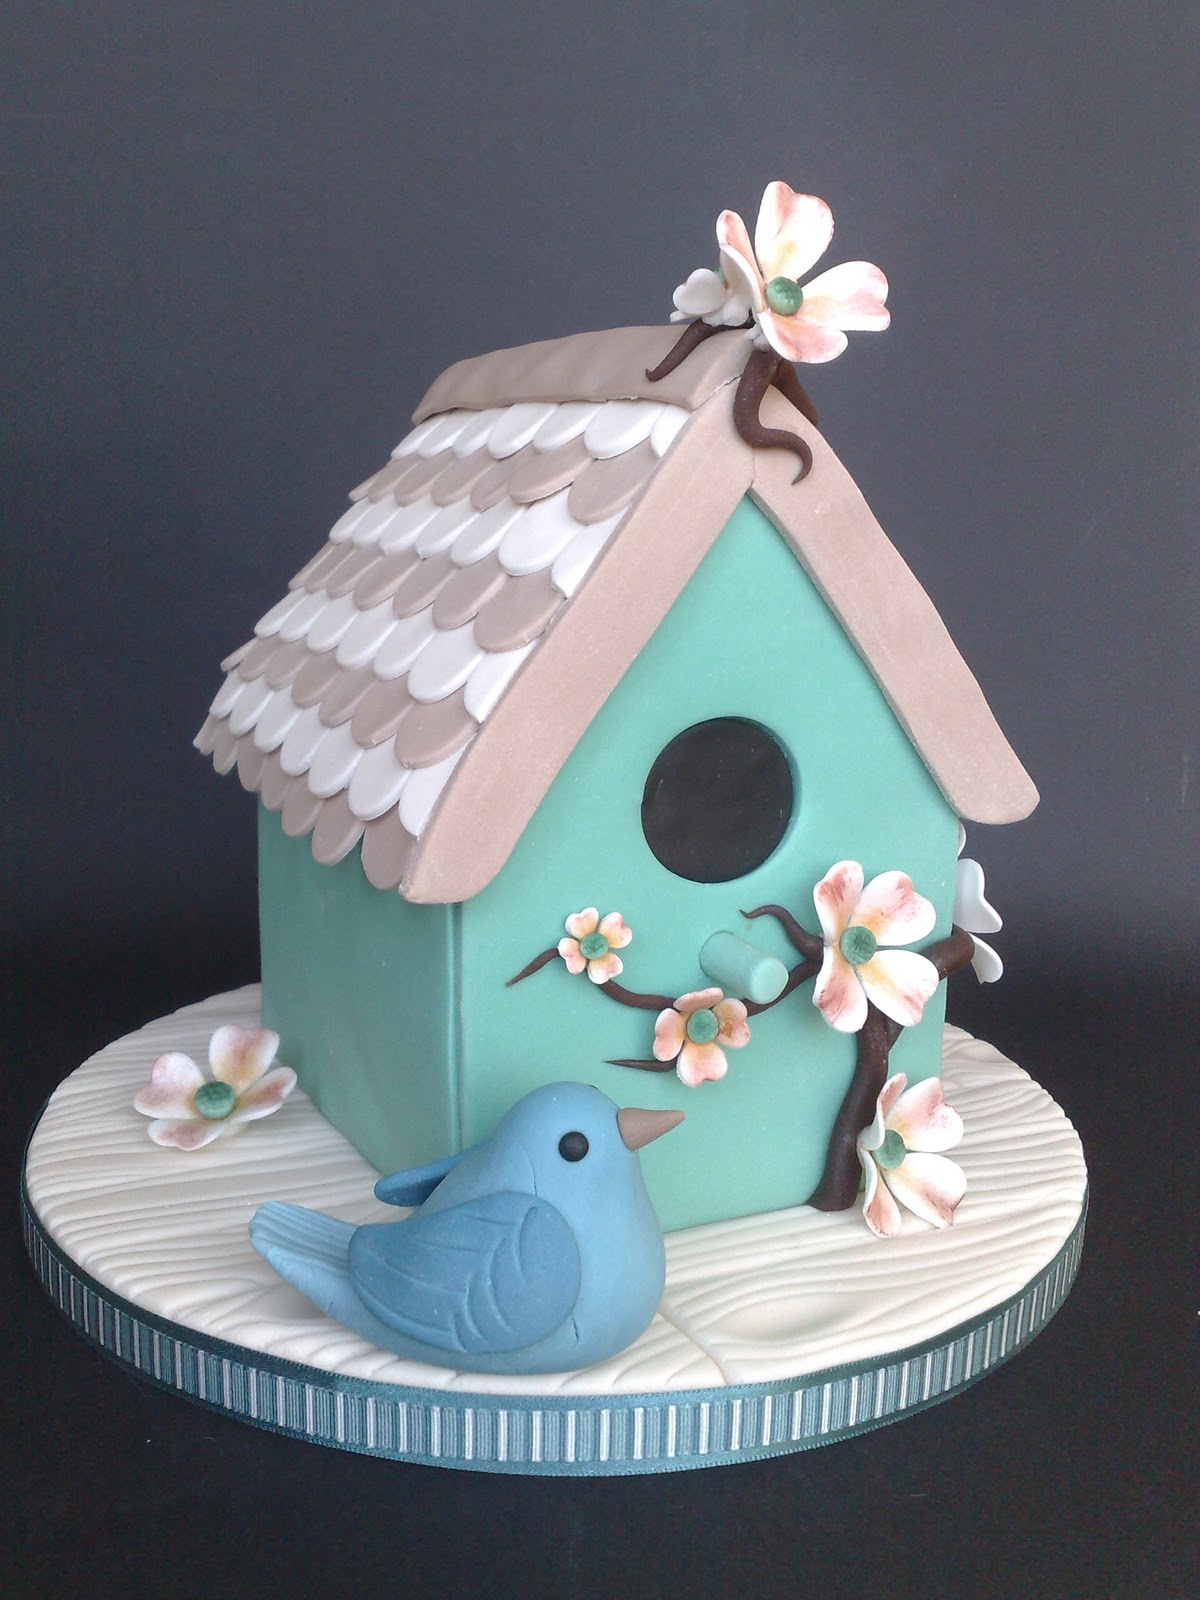 Small Things Iced: Bird House Cake